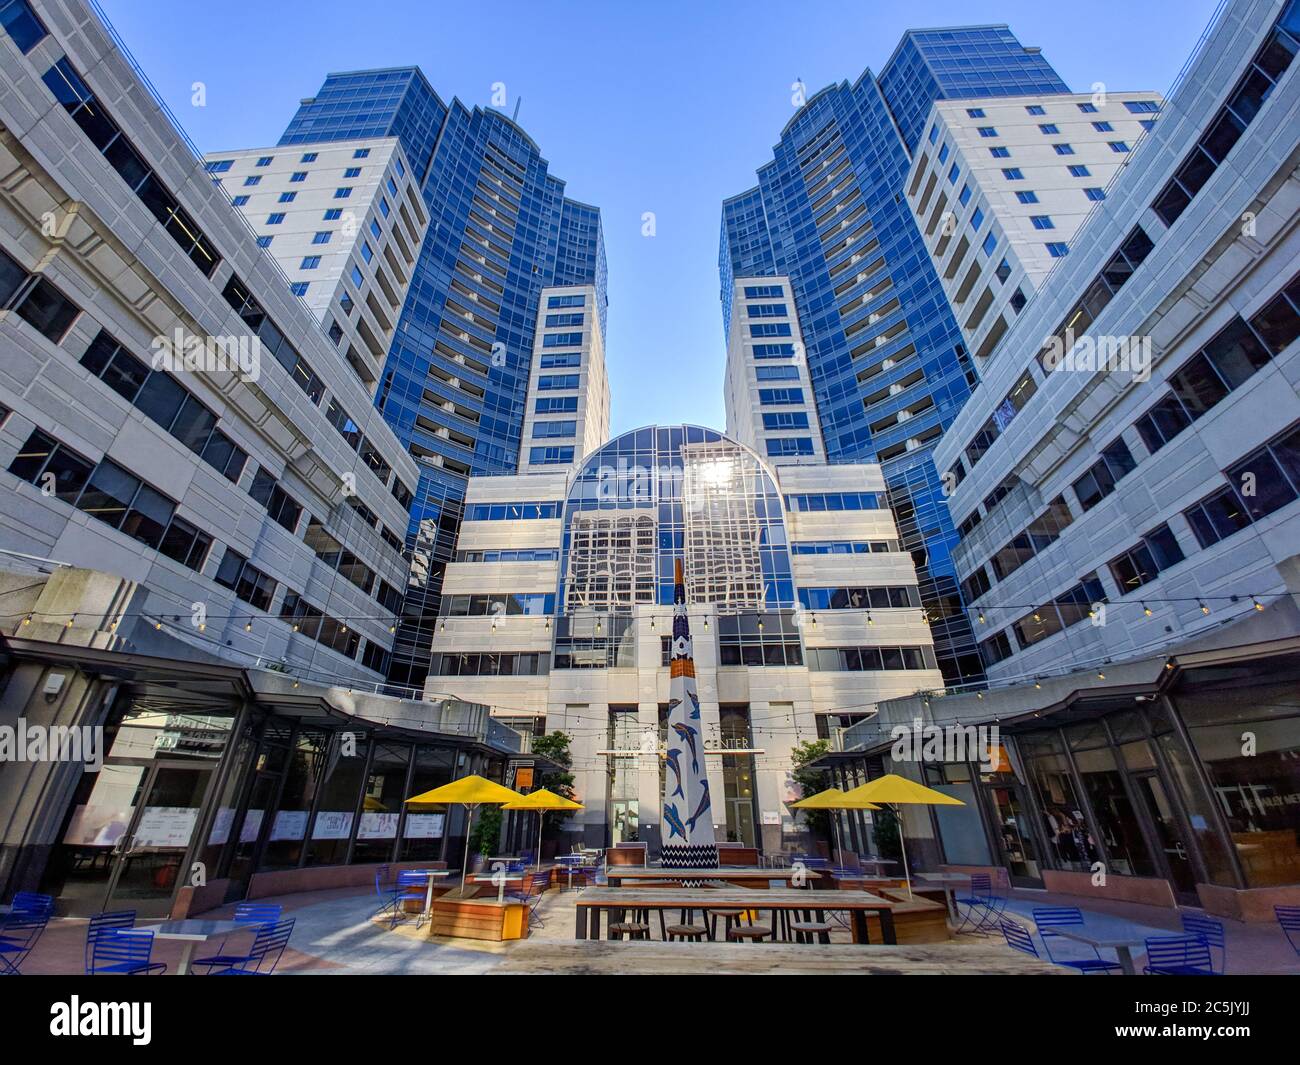 San Francisco, CA, United States - Feb 18, 2019: Google offices at Two  Rincon center skyscraper tower bottom up view with blue sky Stock Photo -  Alamy